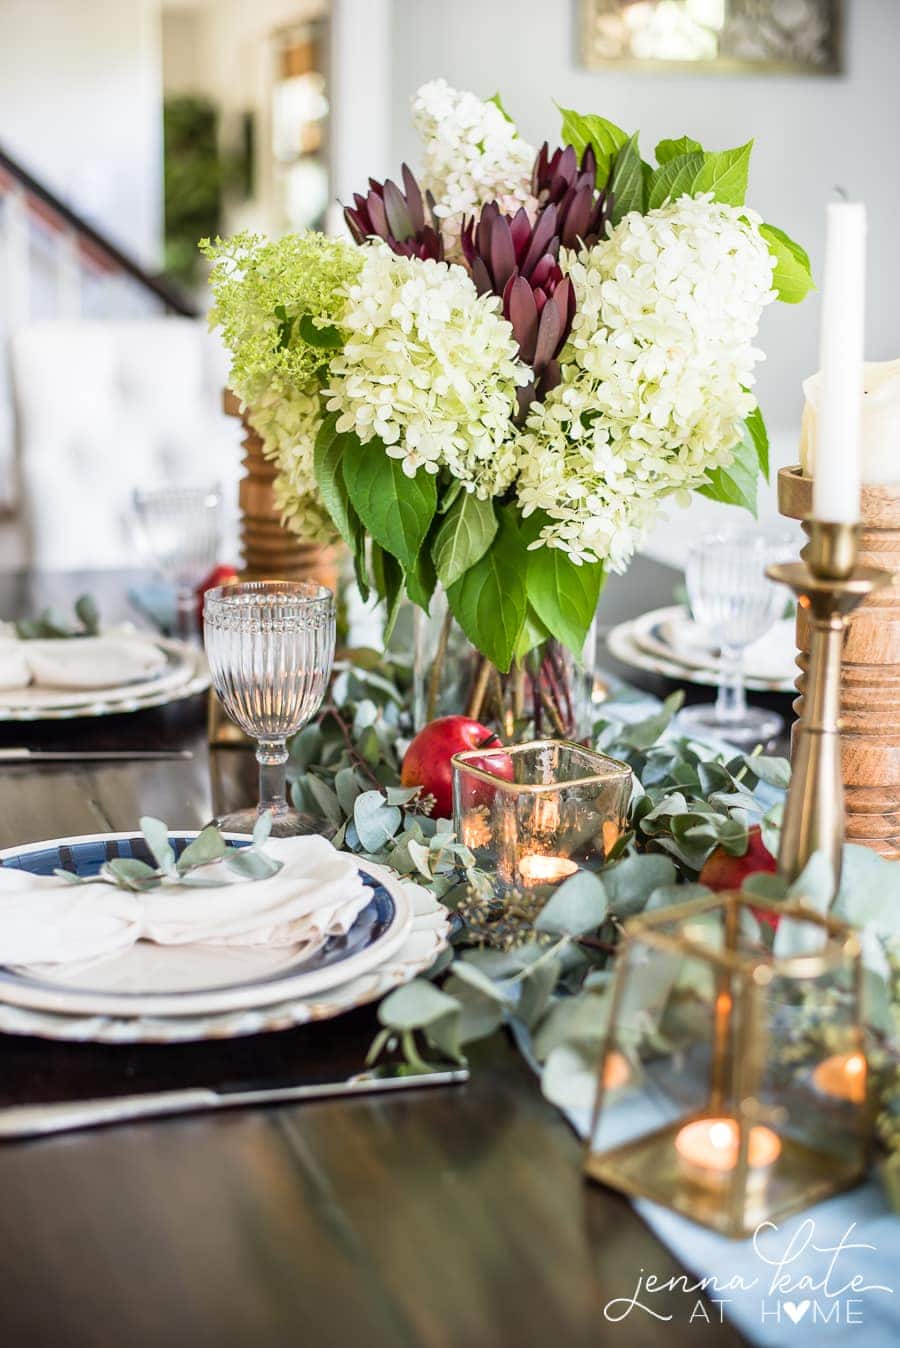 How to decorate dining table for fall